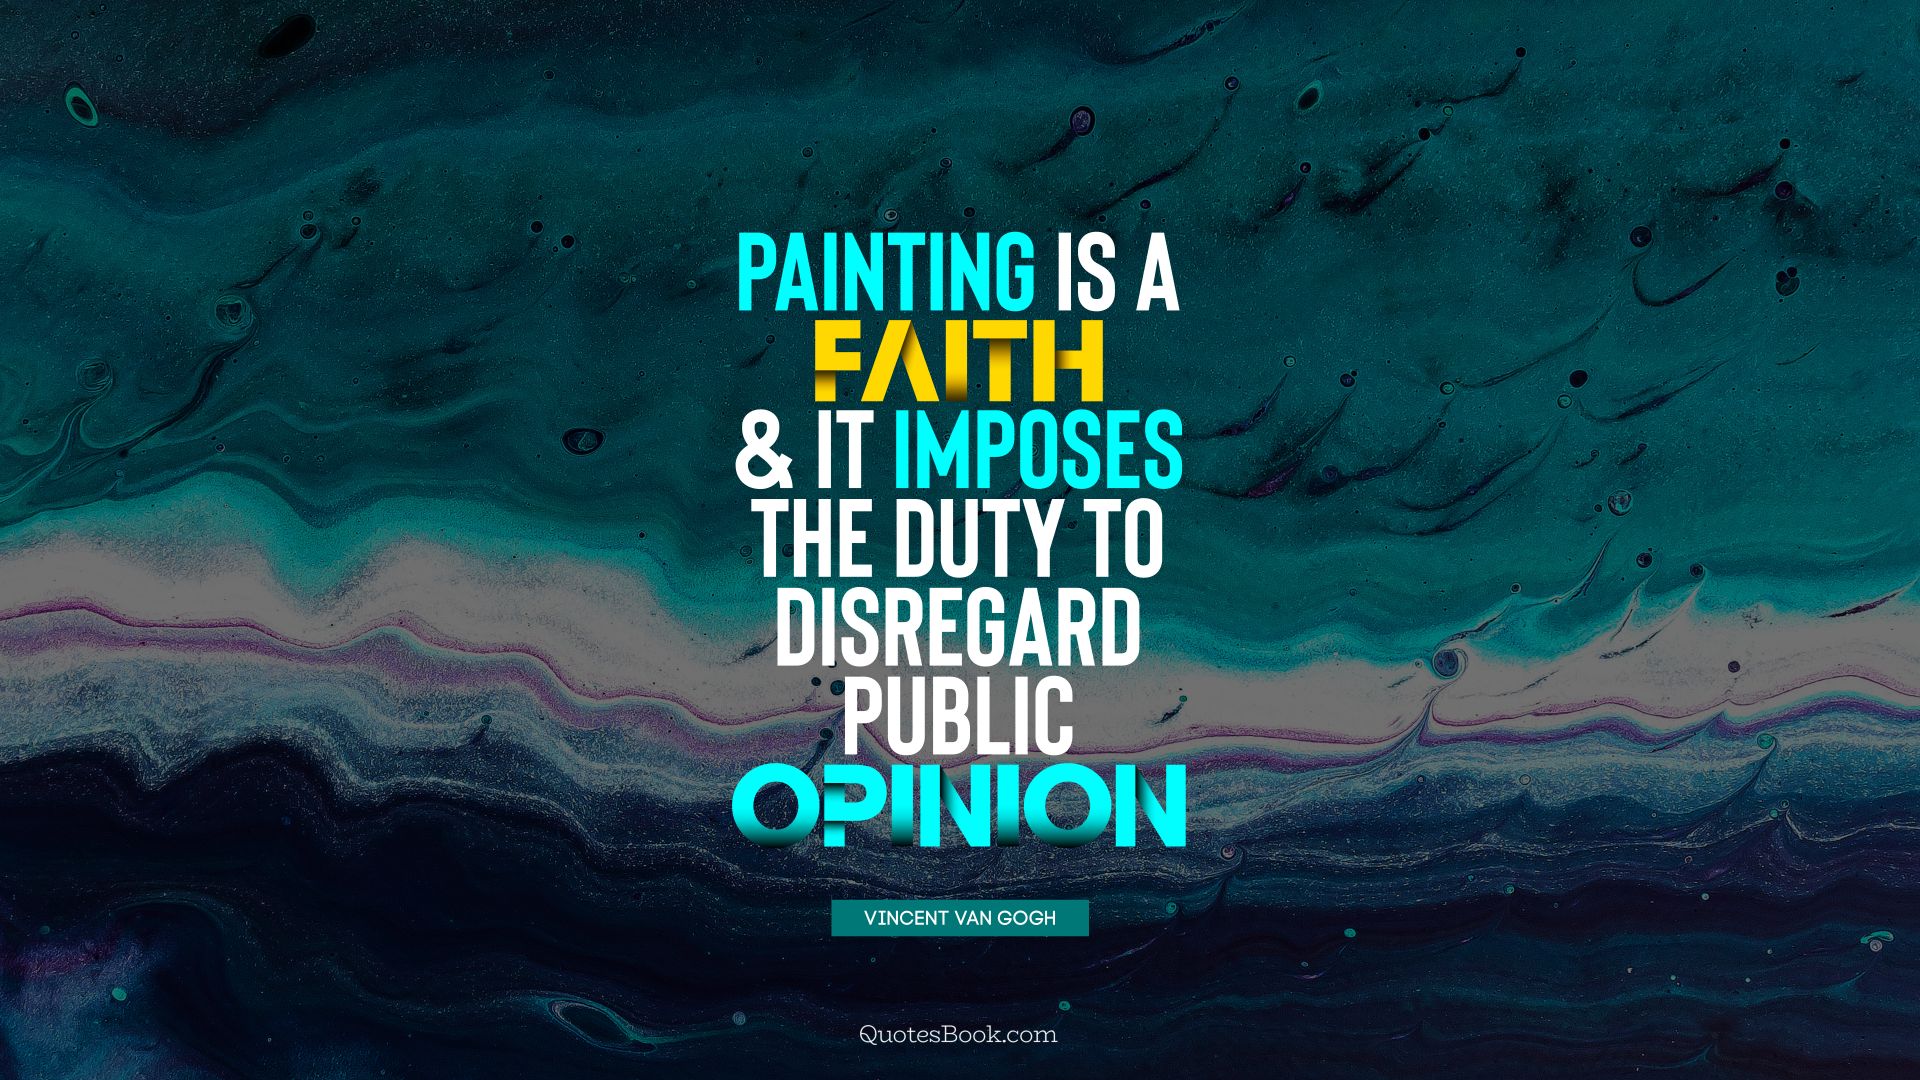 Painting is a faith, and it imposes the duty to disregard public opinion. - Quote by Vincent van Gogh